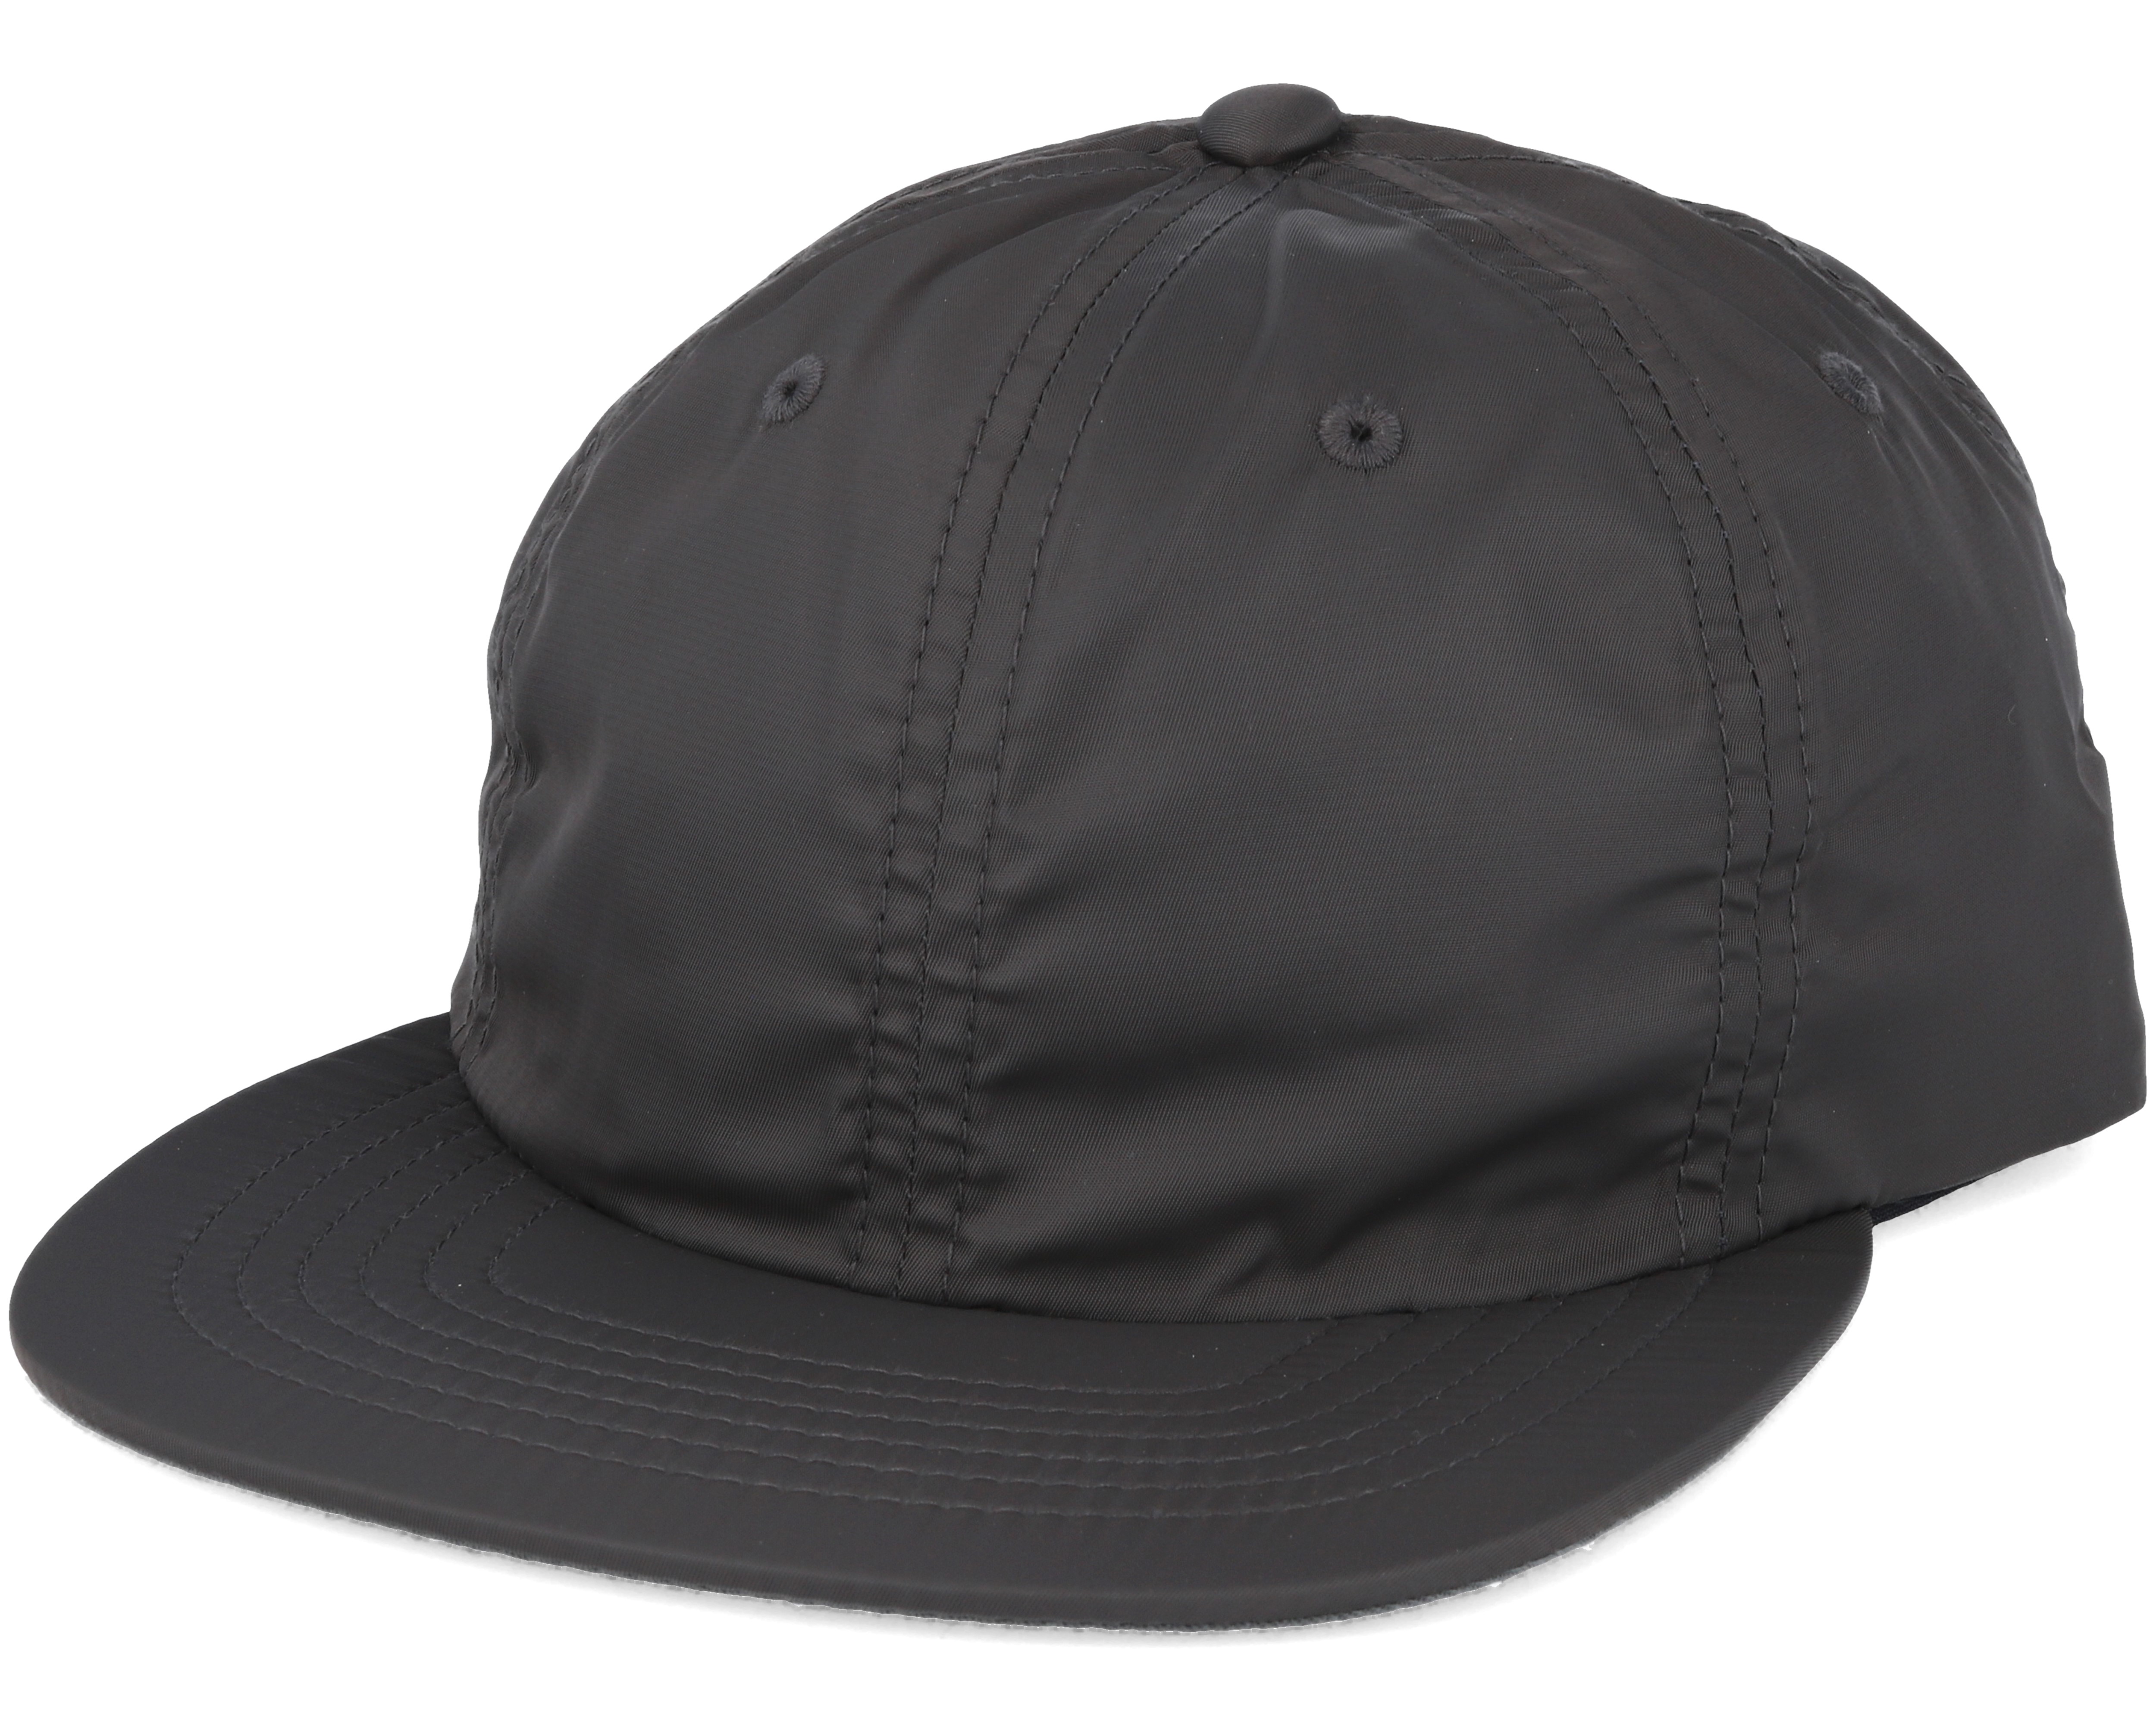 Foldable 6-Panel Anthracite adjustable - Reell caps | Hatstore.co.uk